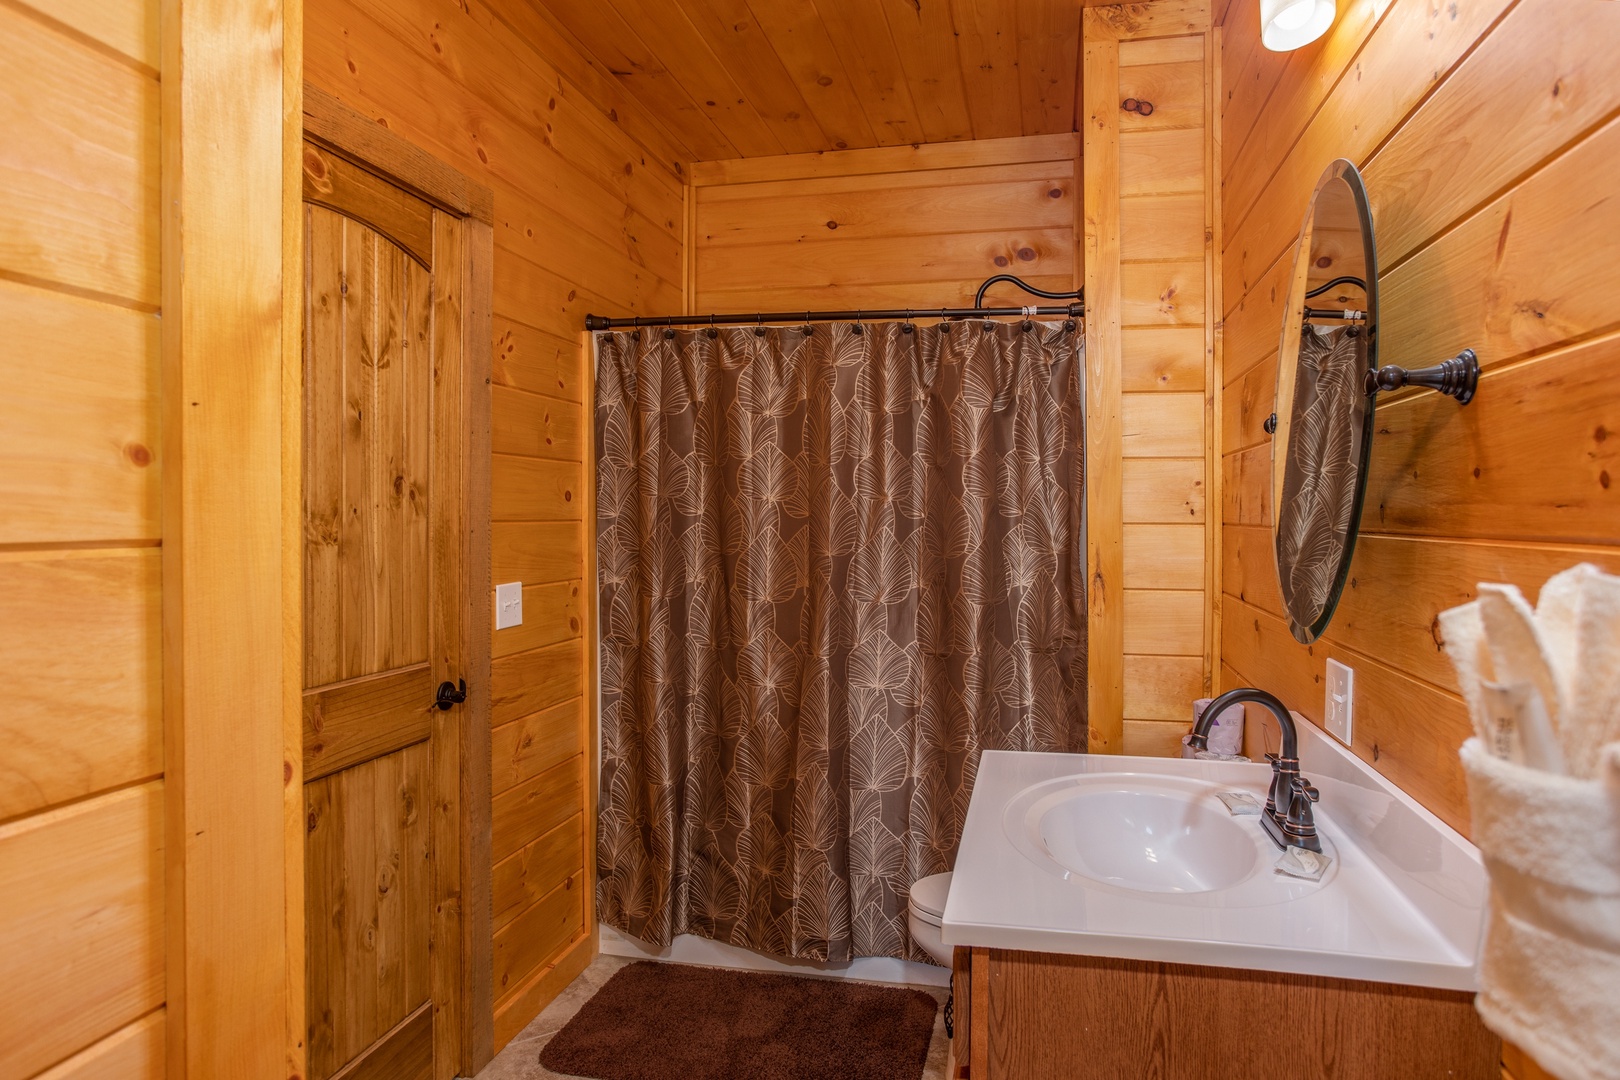 Bathroom with a tub and shower at Four Seasons Palace, a 5-bedroom cabin rental located in Pigeon Forge